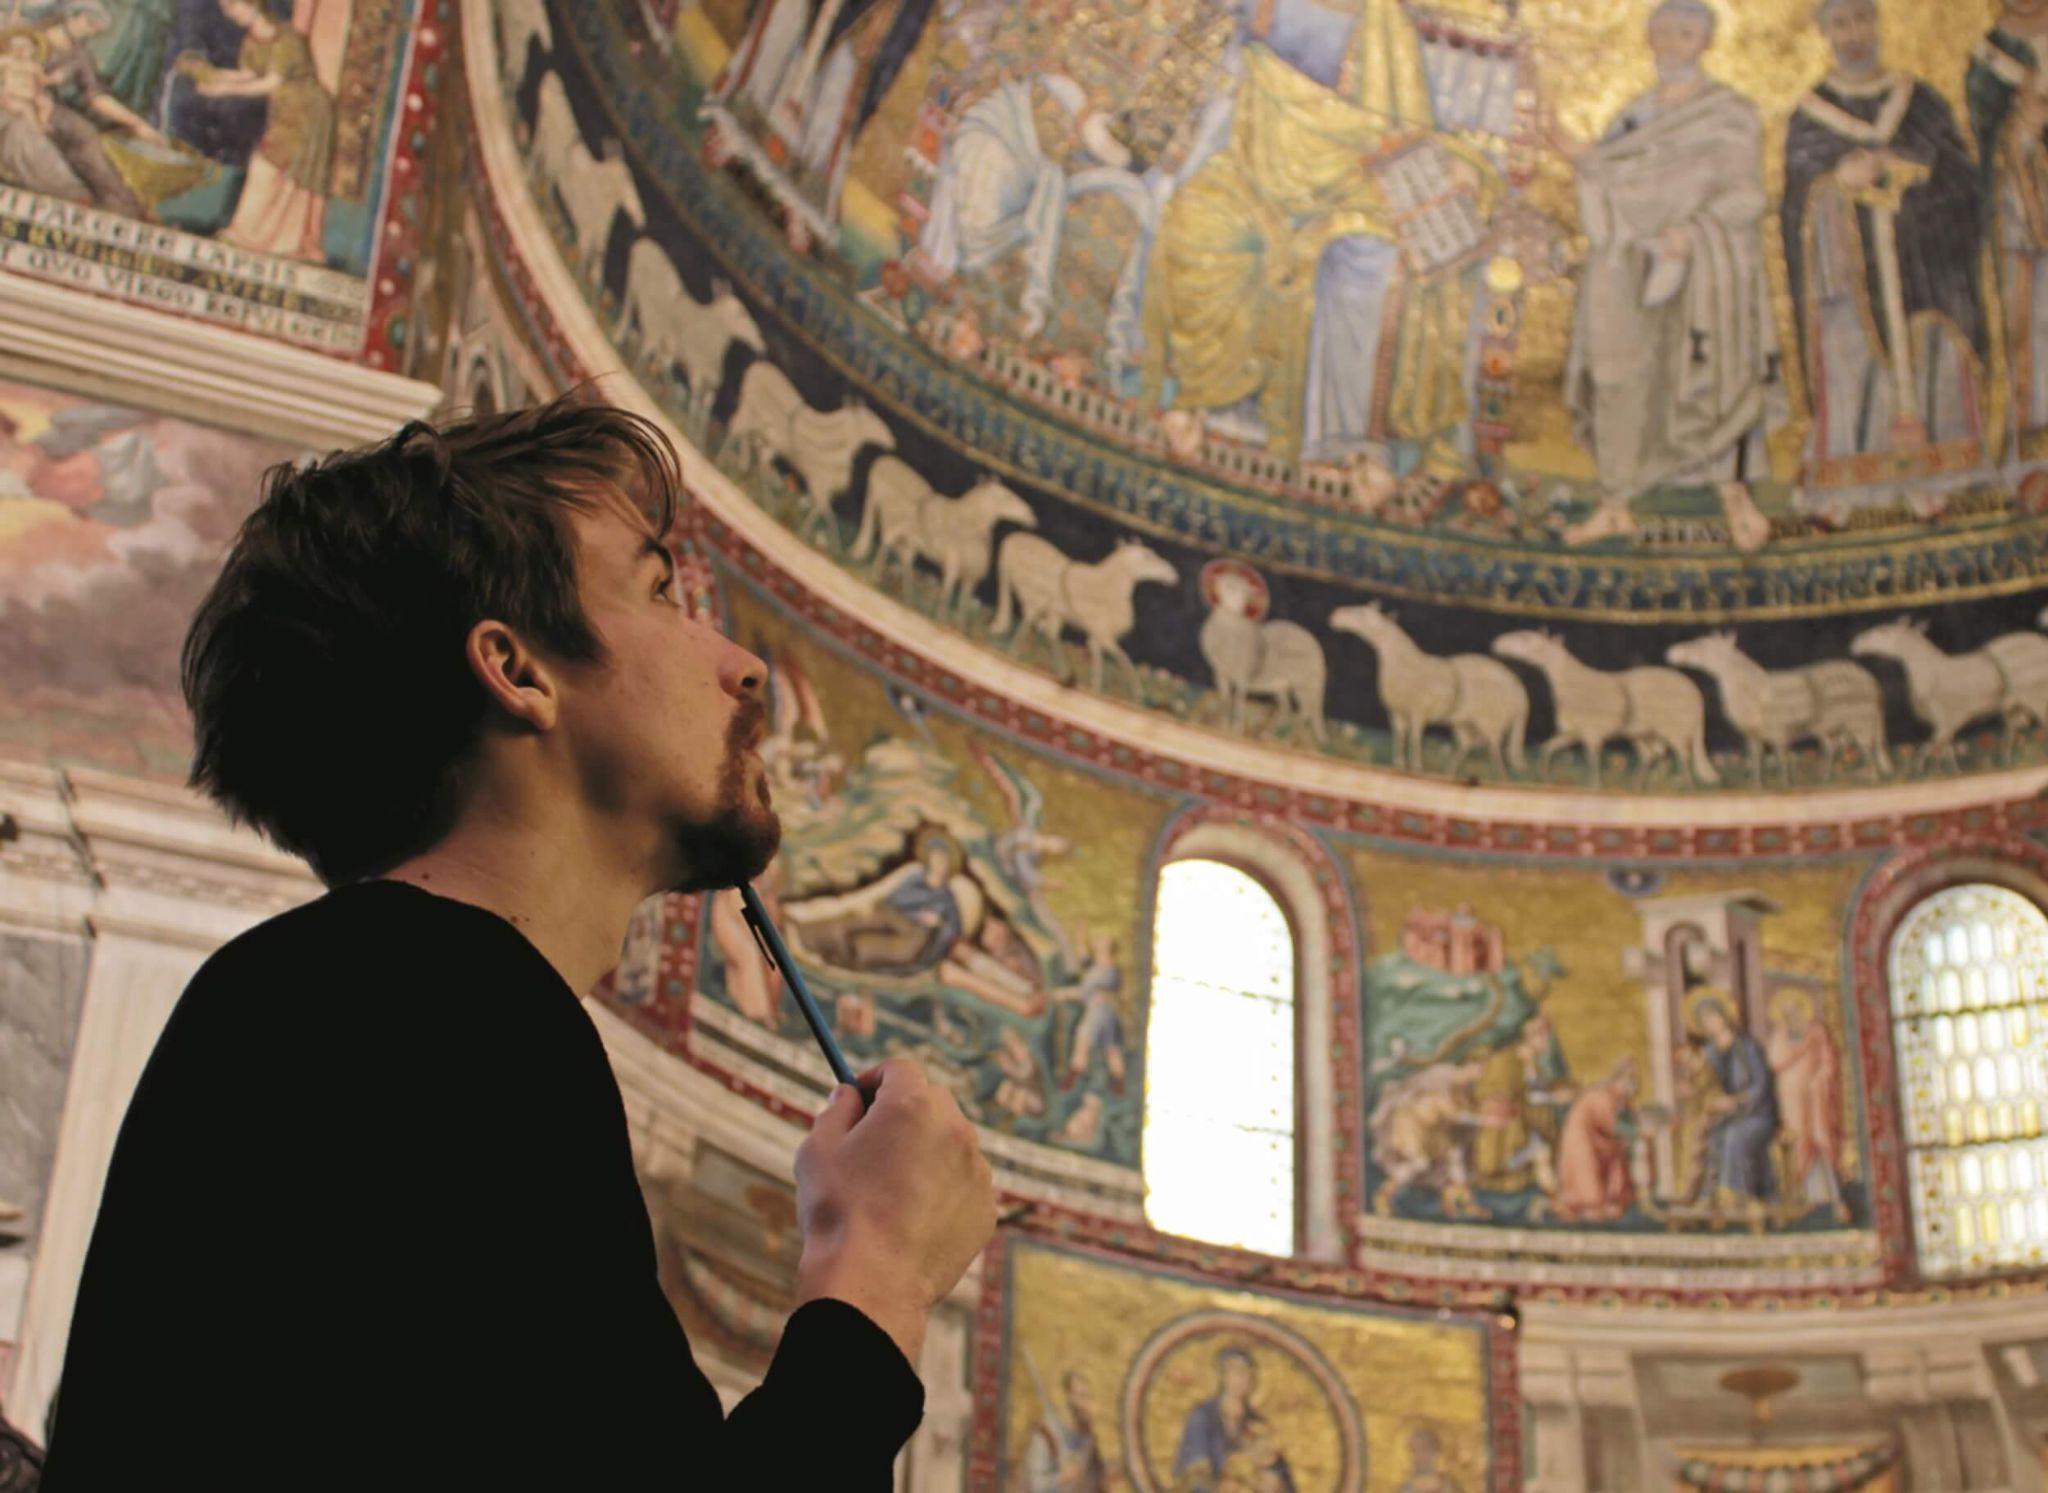 A student attending university in Rome analyzing a historical painted ceiling